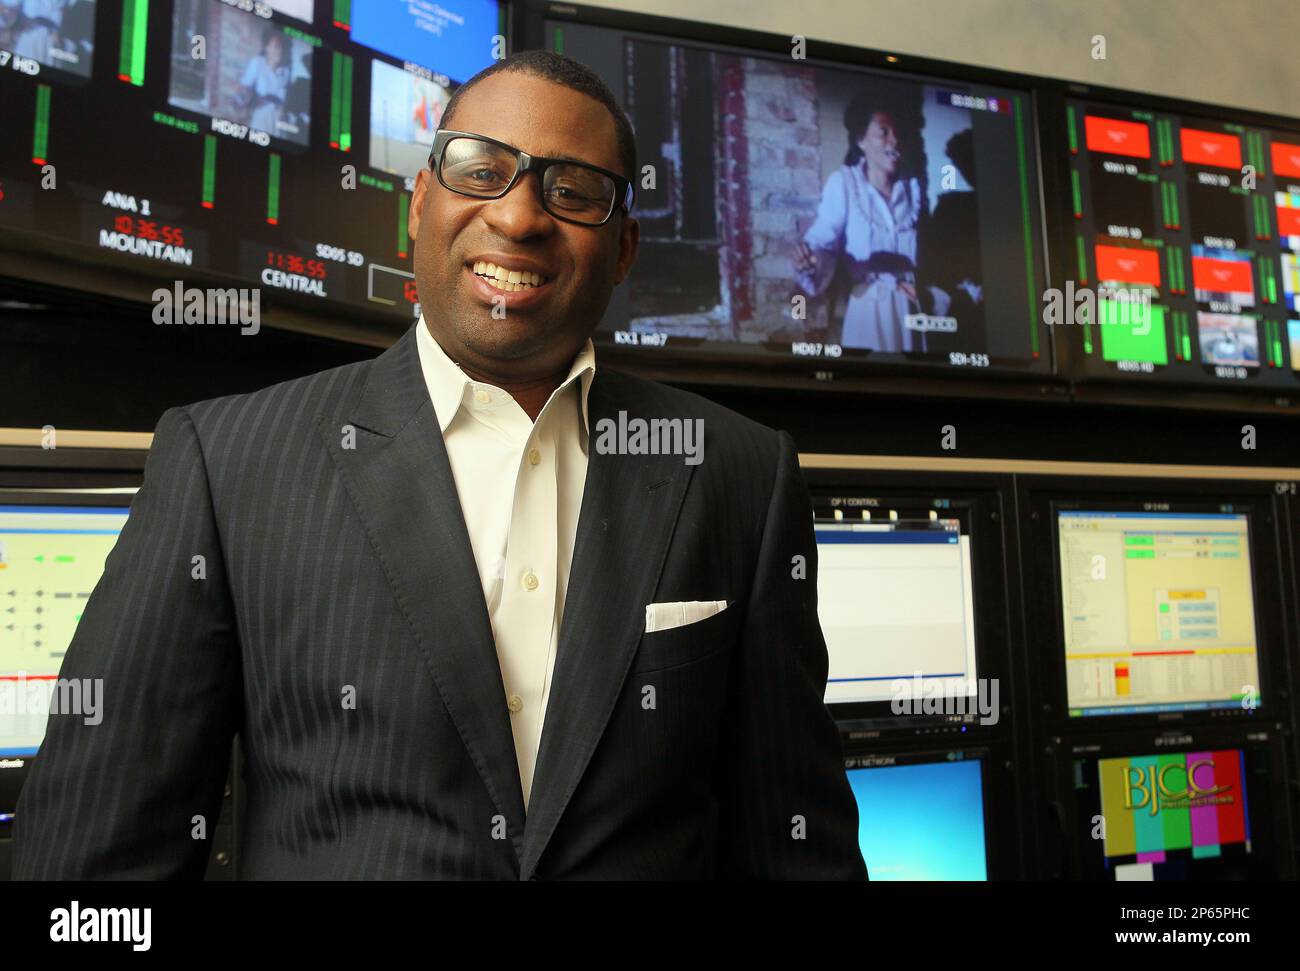 Portrait of Bounce TV executive Ryan Glover, inside the broadcast control  room at Encompass studios in Atlanta. The new Atlanta-based TV network  launched this week, targeting African Americans. Bounce TV is backed